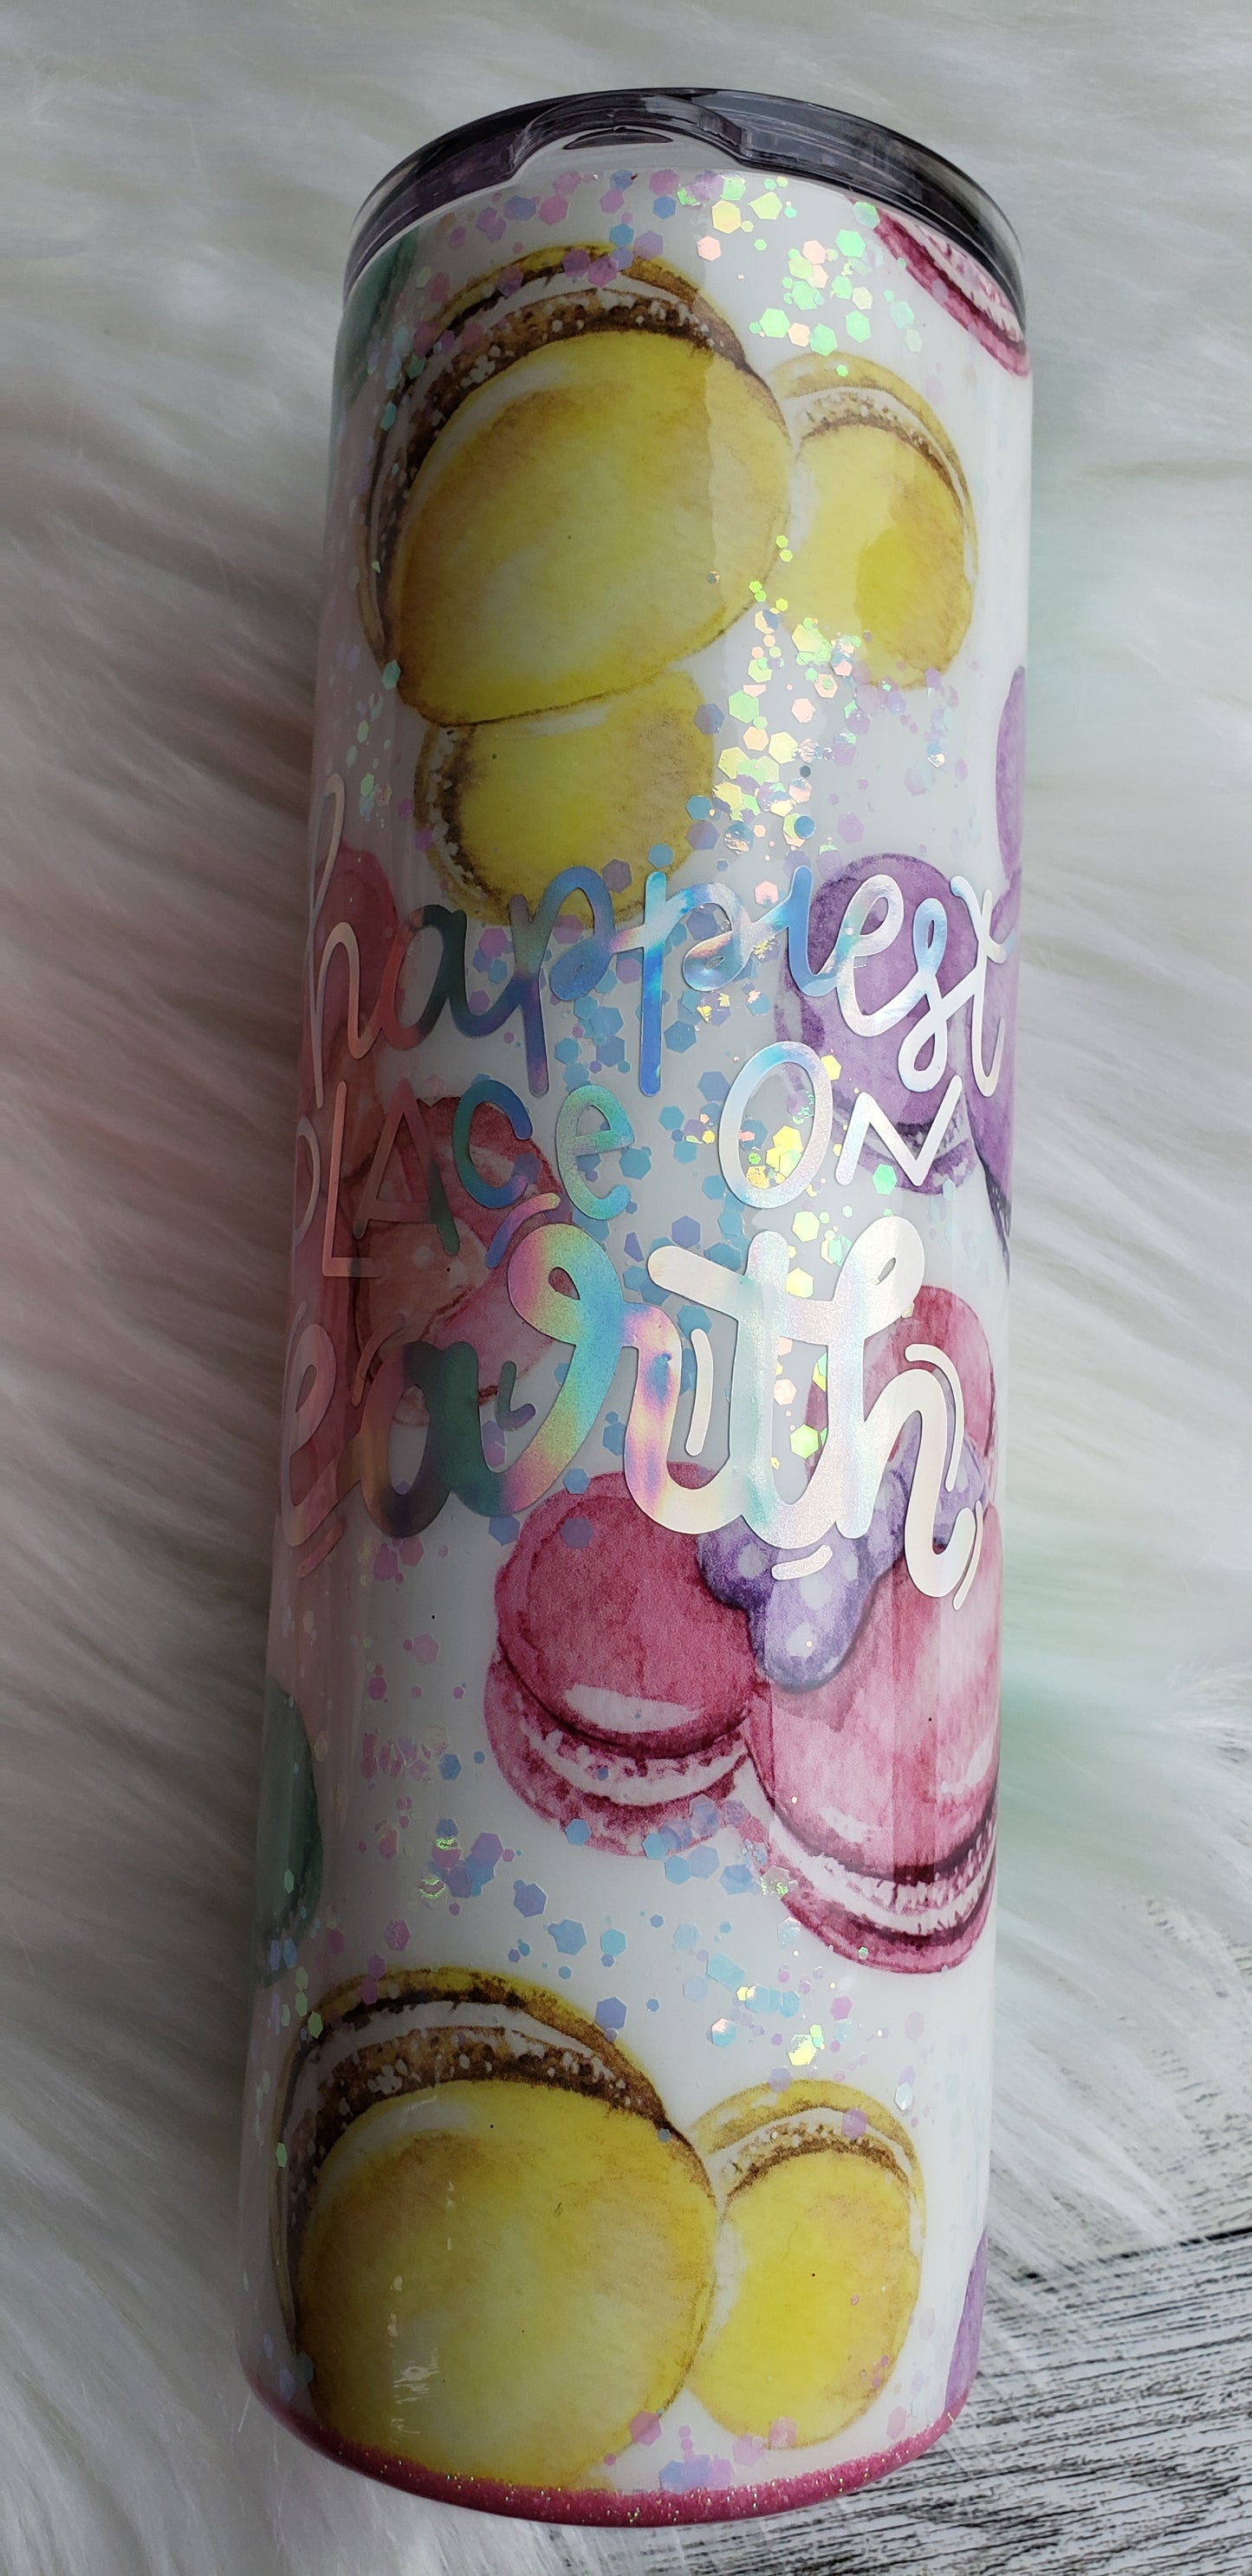 20 oz "Happiest Place on Earth" Stainless Steal Tumbler